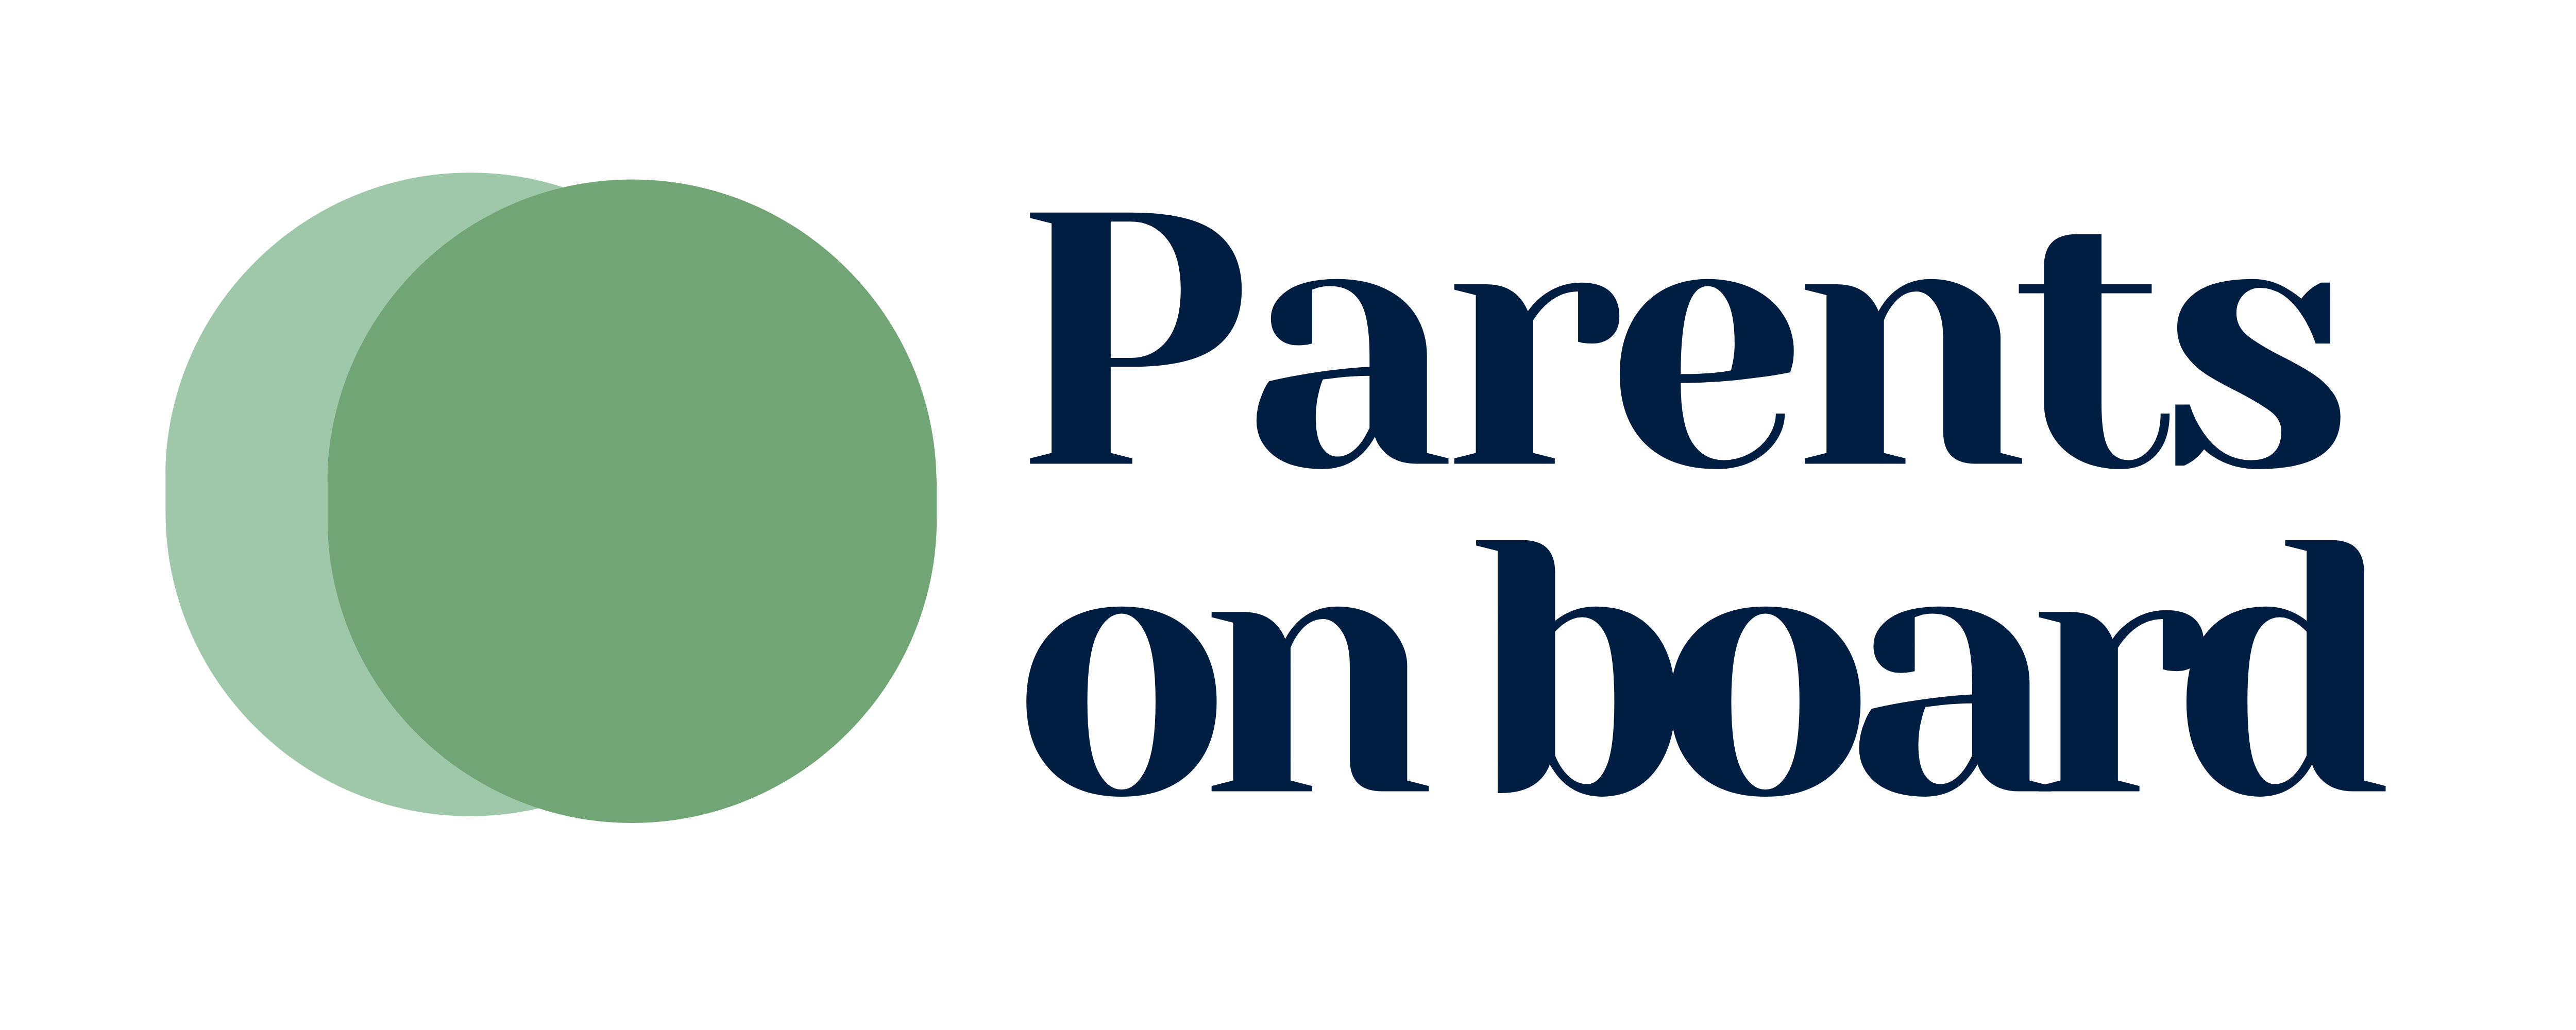 Parents on board